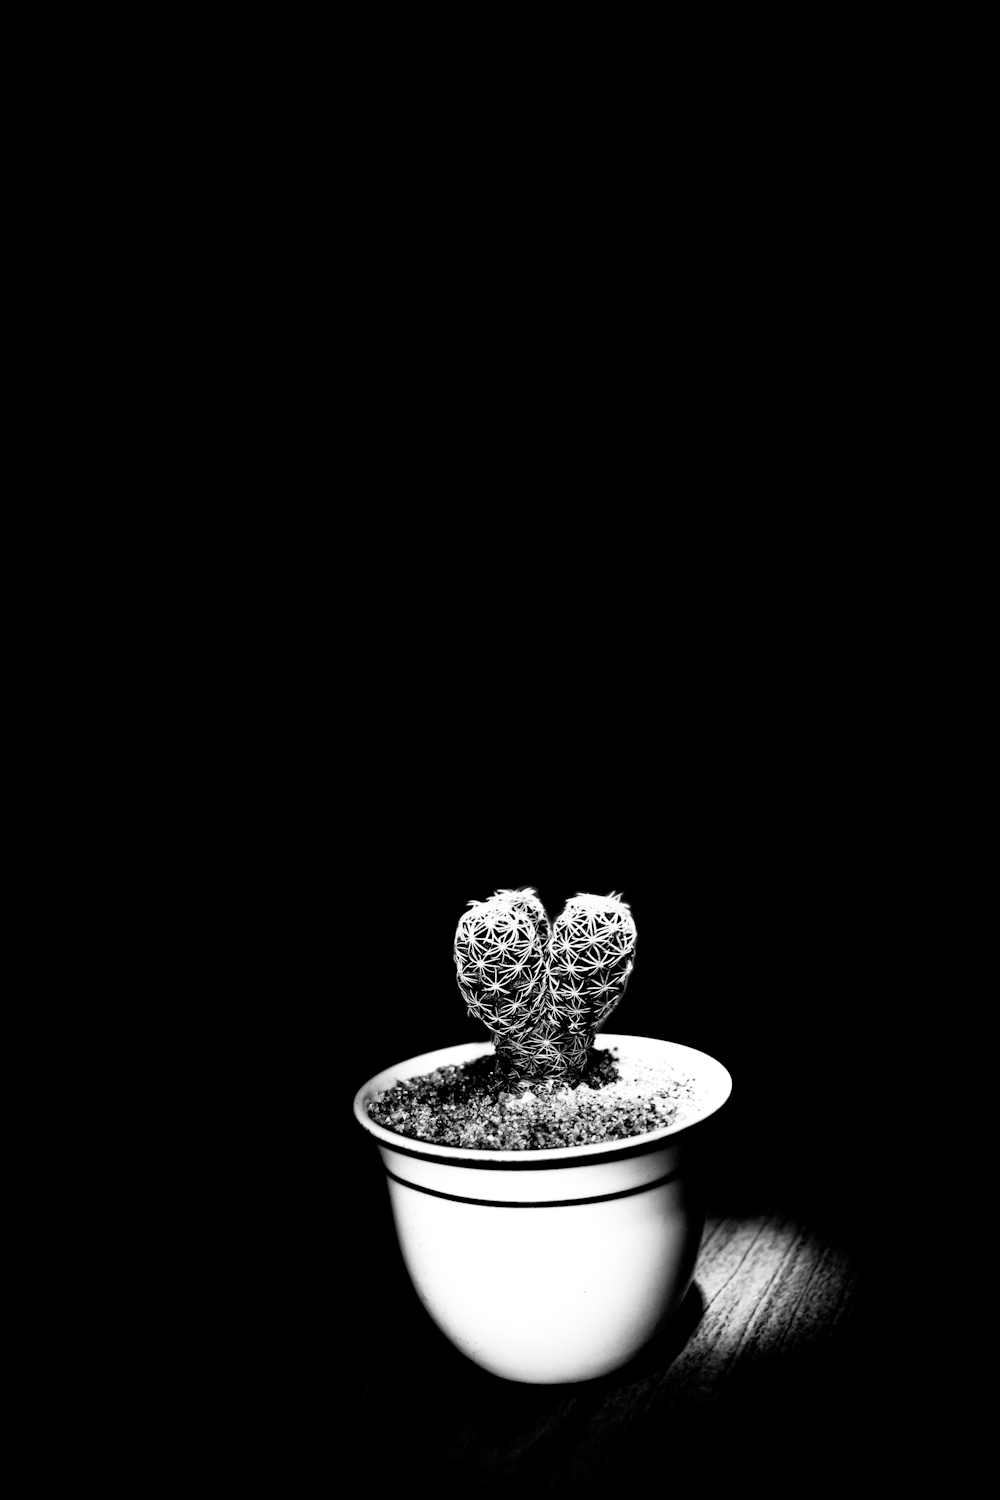 potted cactus plant grayscale photography